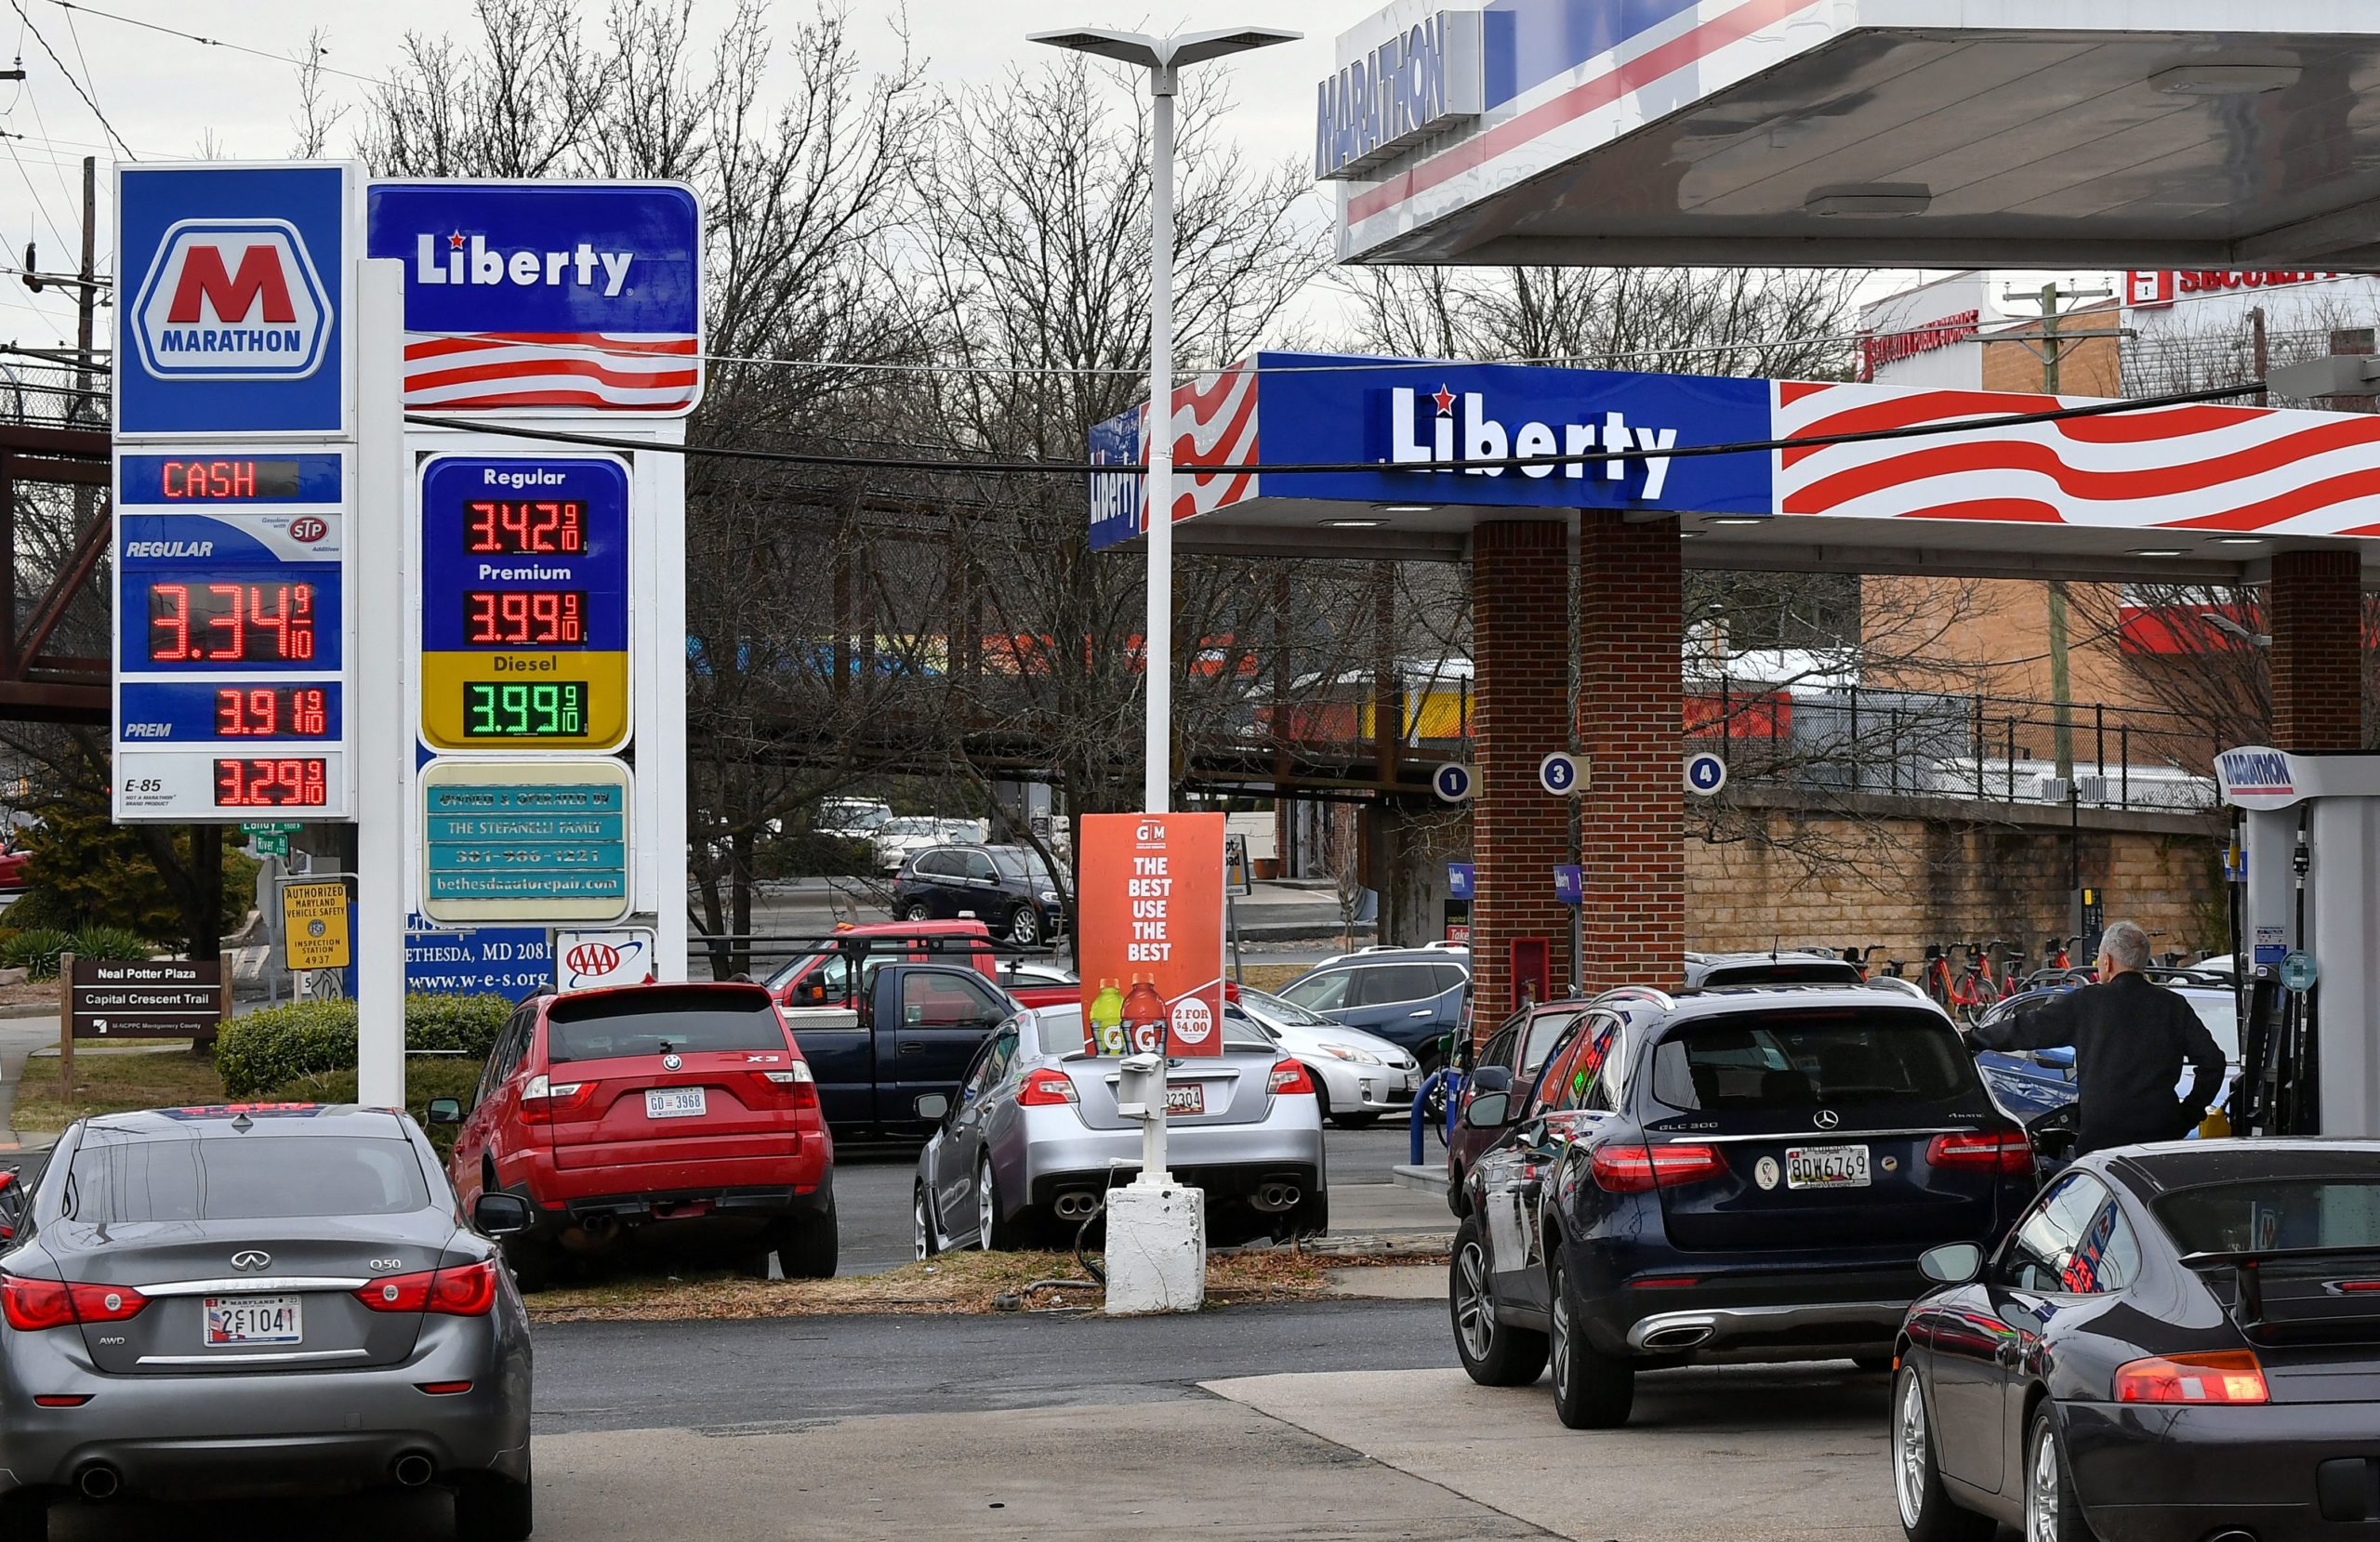 Gas stations are seen in Bethesda, Maryland on Wednesday.The average price of gas in the U.S. reached $3.53 per gallon this week, its highest level since July 2014. (Mandel Ngan/AFP via Getty Images)